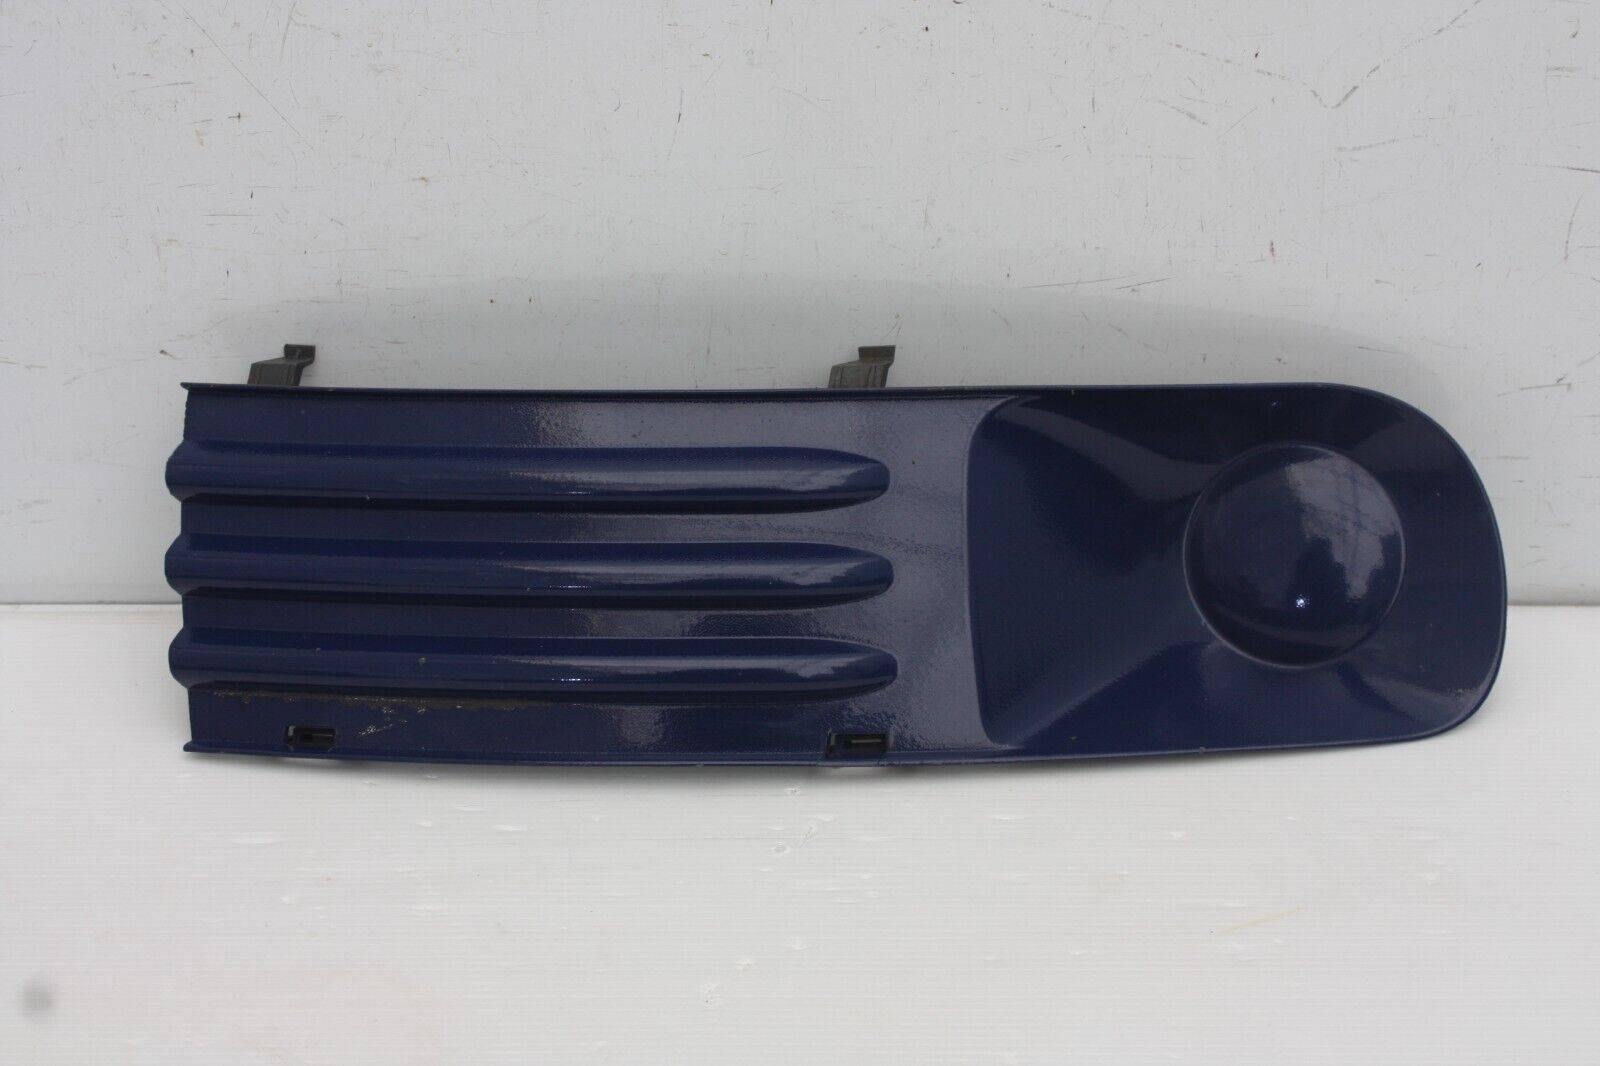 VW-Transporter-Front-Bumper-Right-Grill-Trim-2004-to-2009-7H0807490C-Genuine-176029790443